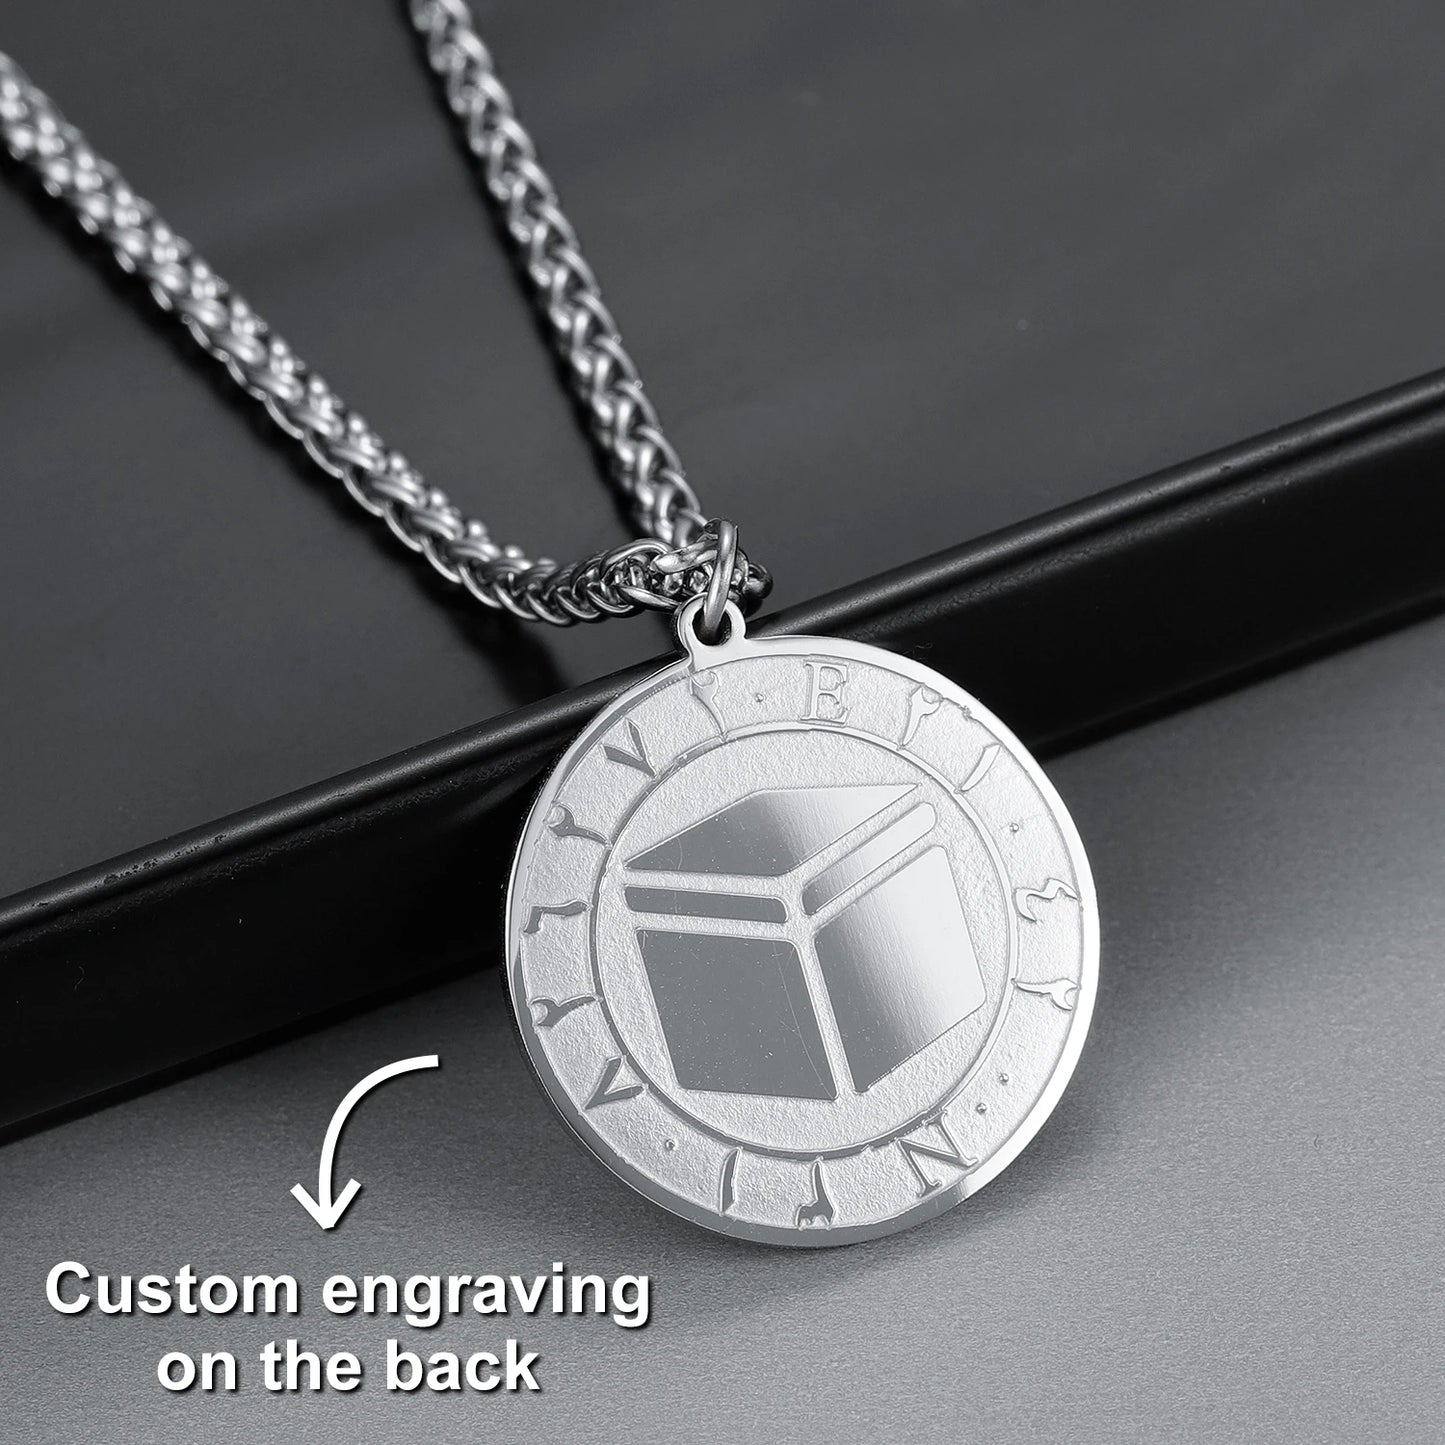 New Kaaba Coordinates Coin Necklace For Men Personalized Arabic English Letter Embossed Islam Pendants Stainless Stee Jewelry